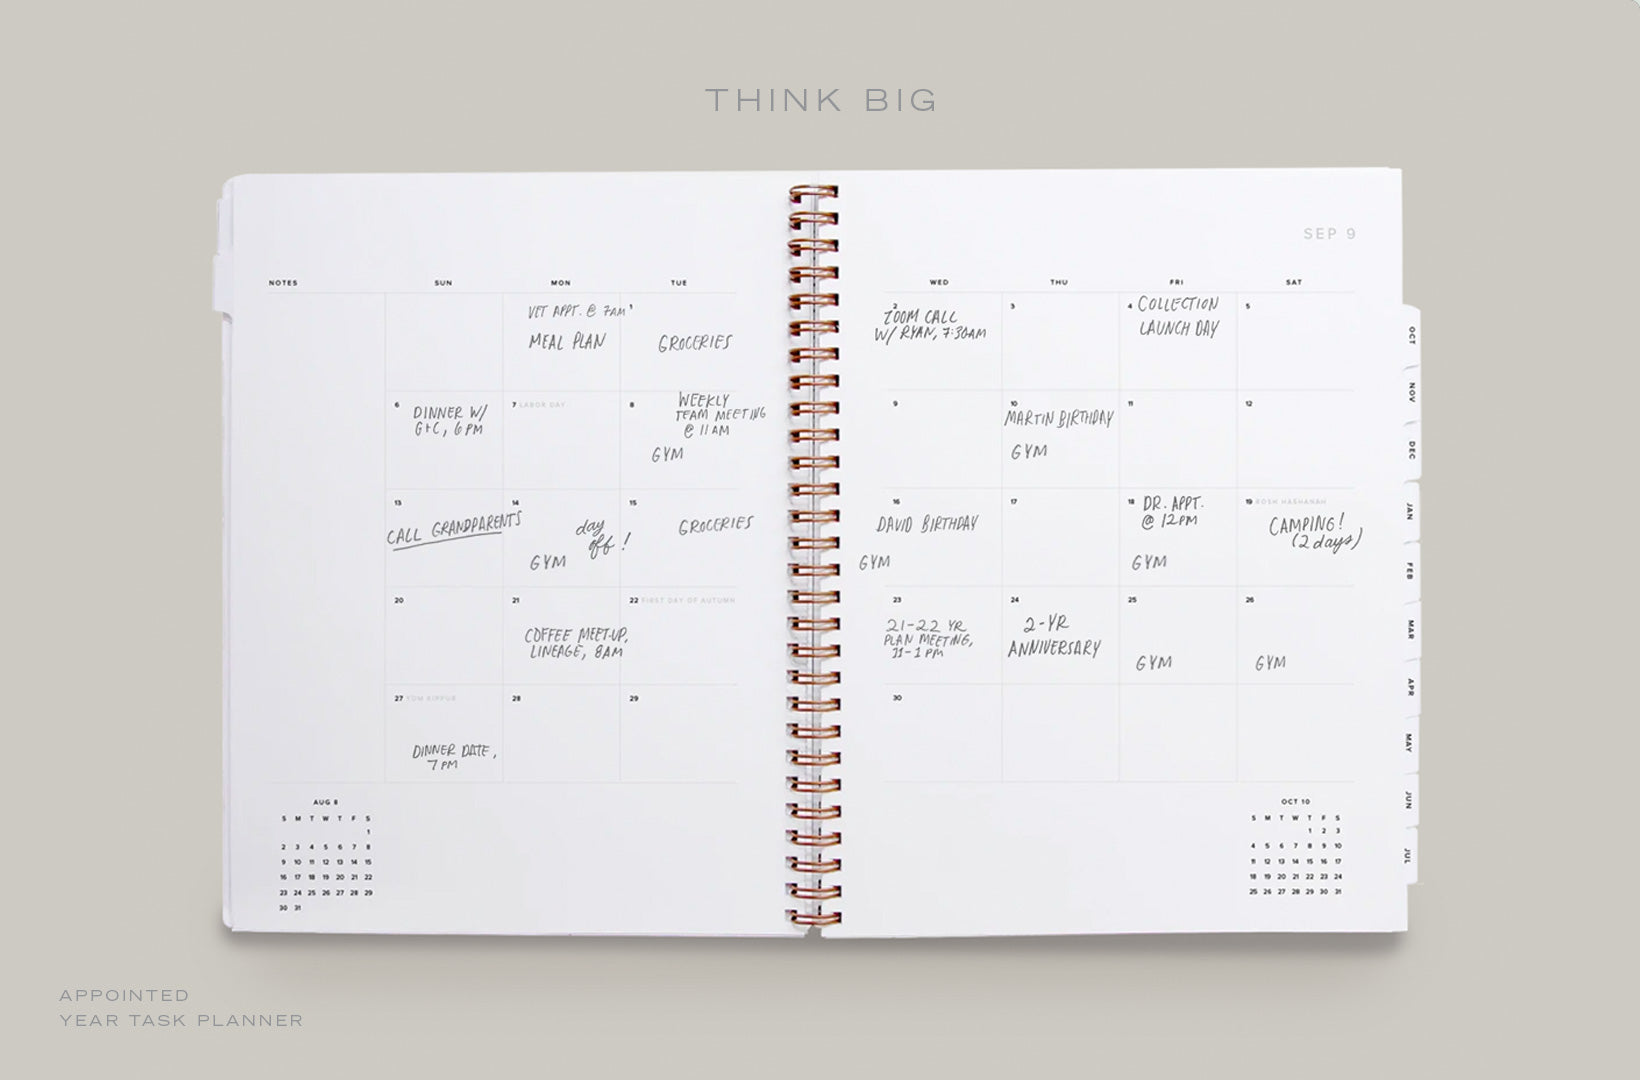 A Year Task Planner lays open to the month spread with appointments and events filled in